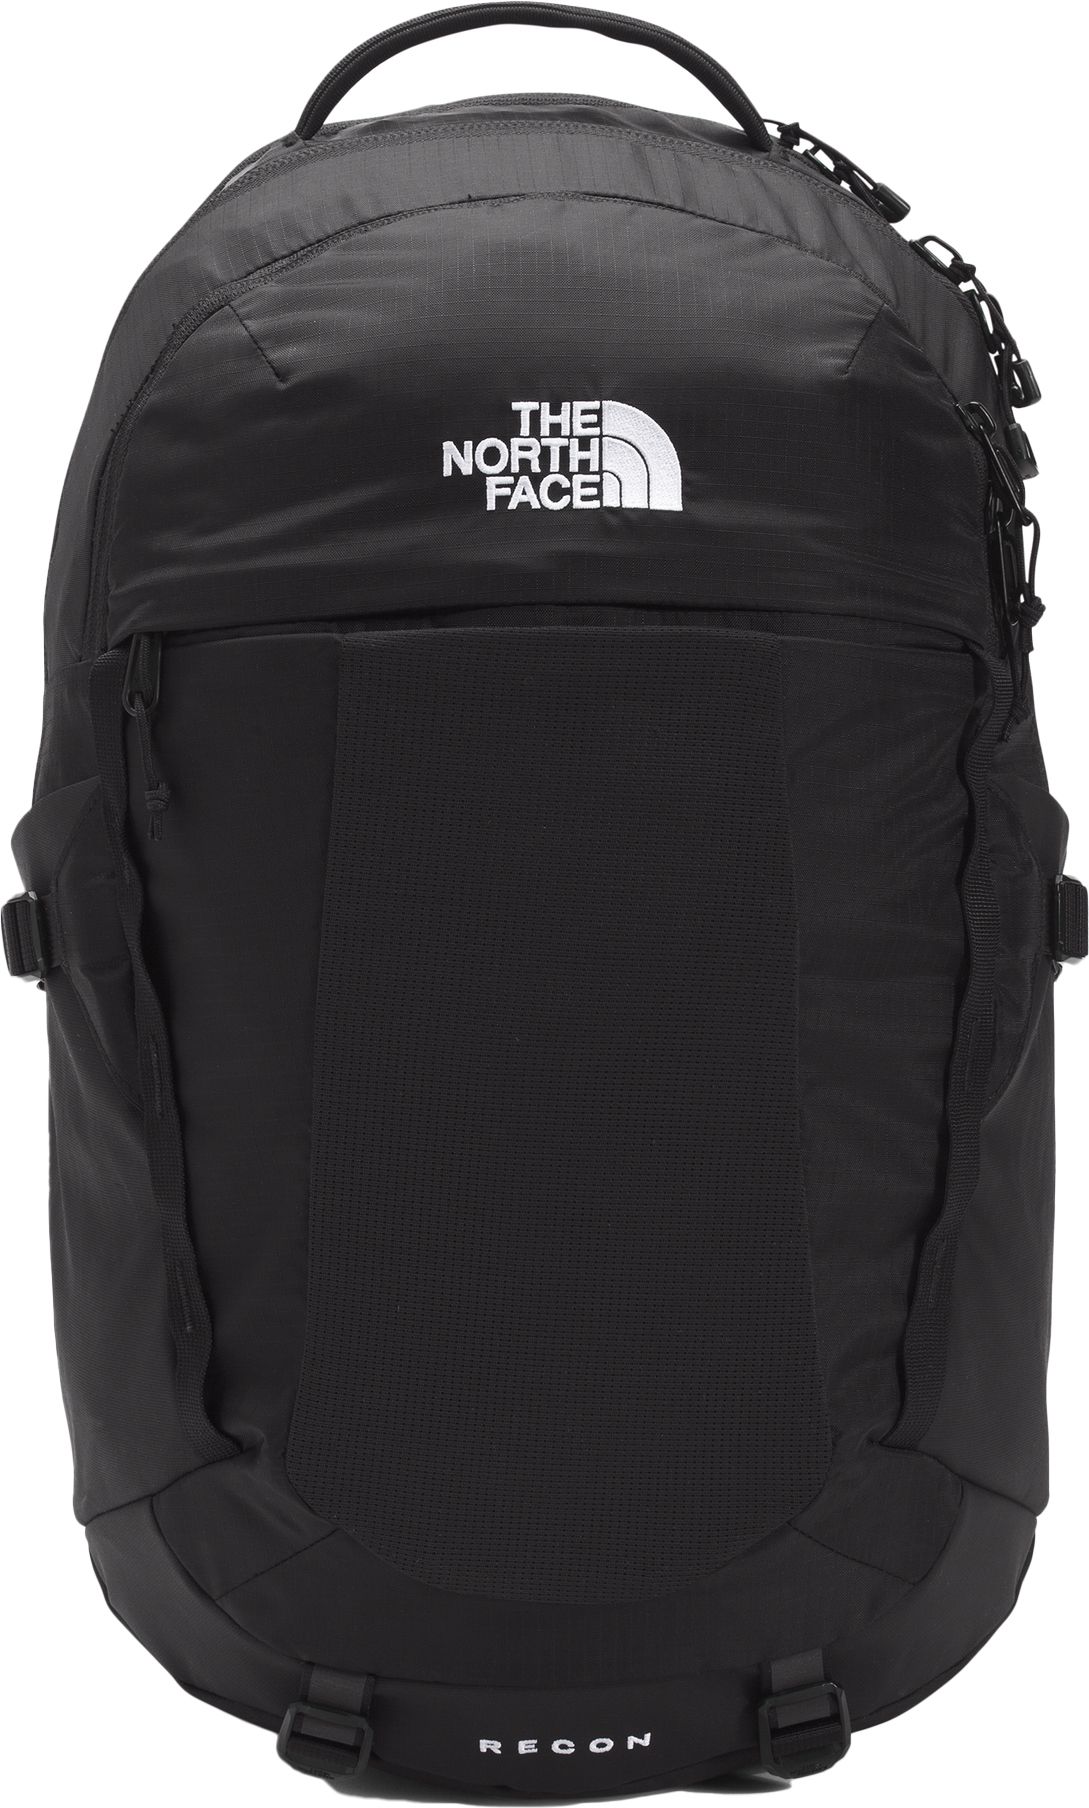 Photos - Backpack The North Face Women's Recon , TNF Black/TNF Black 21TNOWWRCNLX21X 